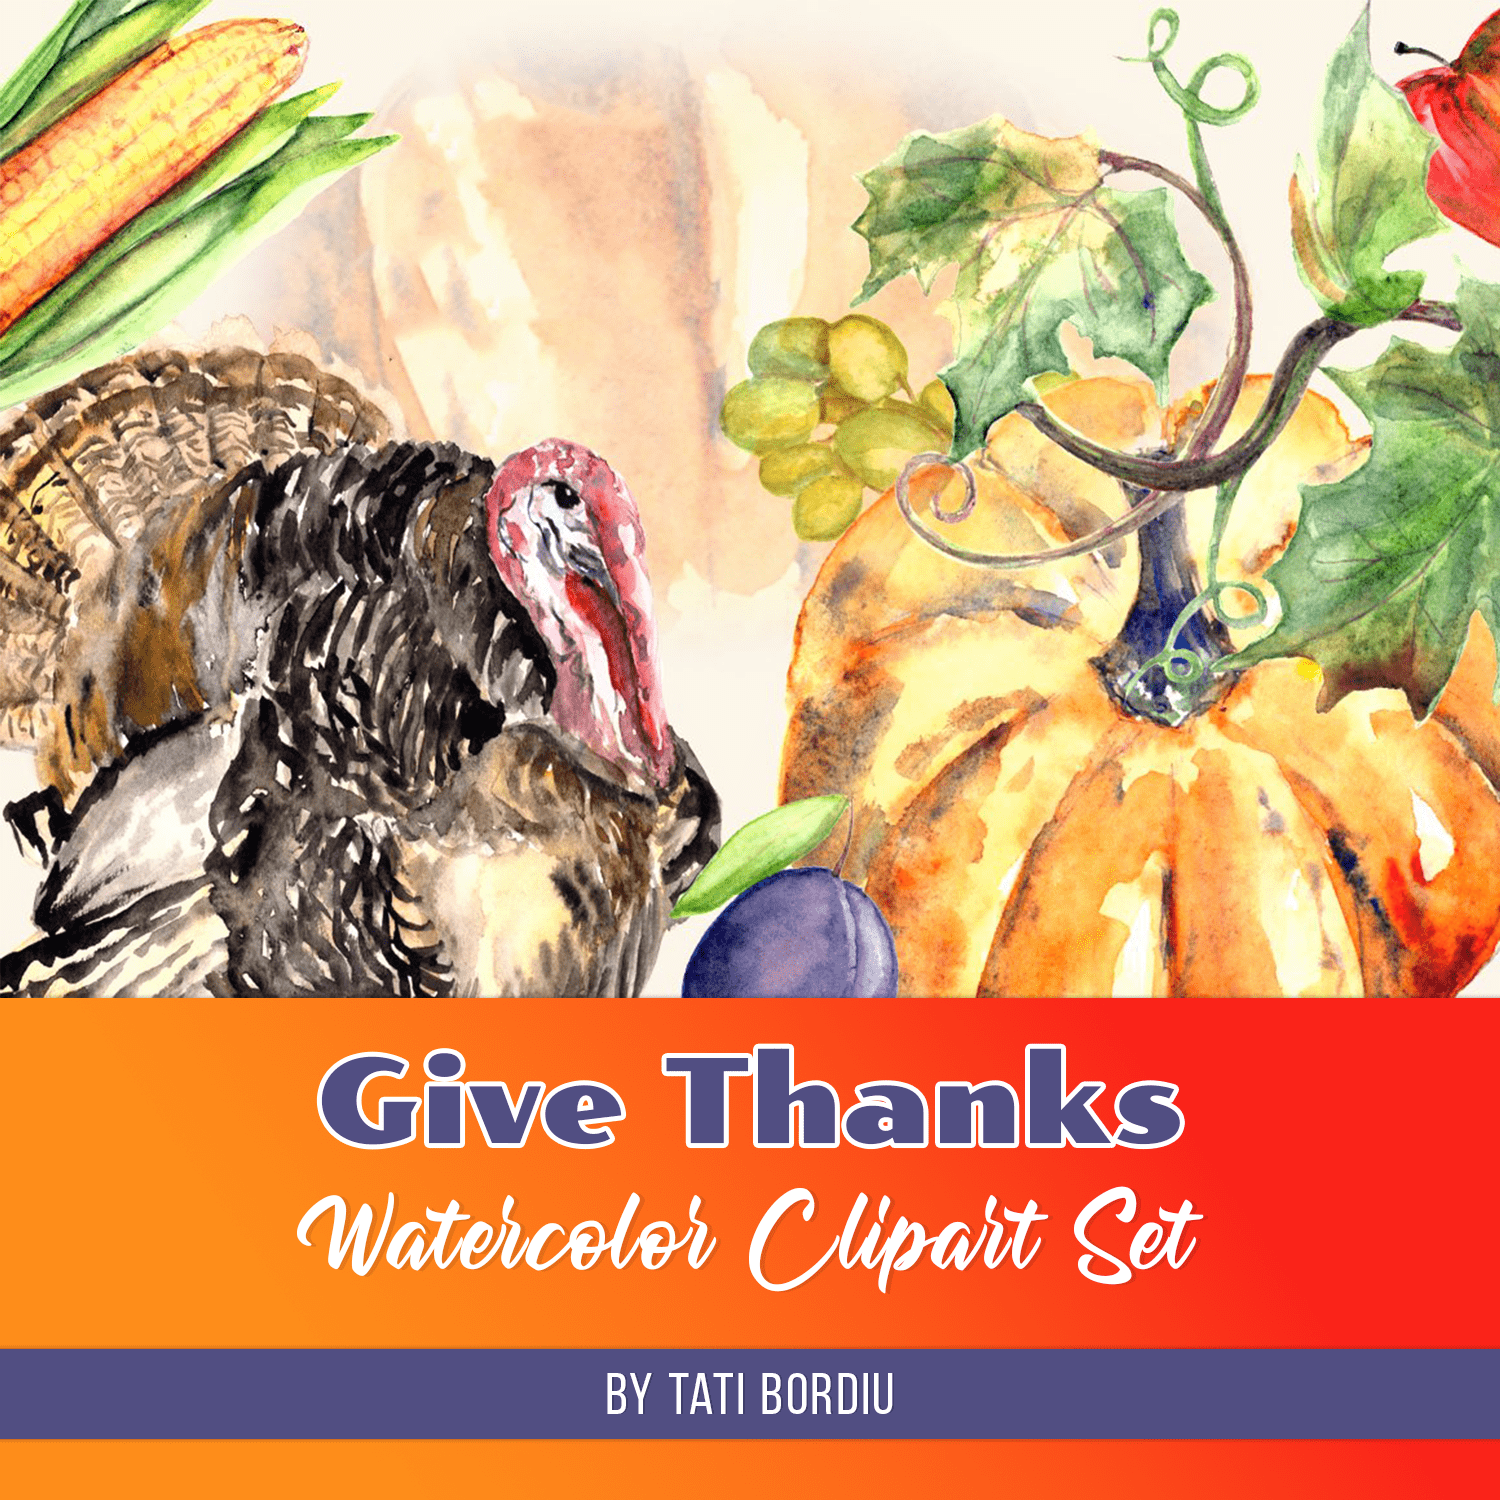 Give Thanks - Watercolor Clipart Set cover.